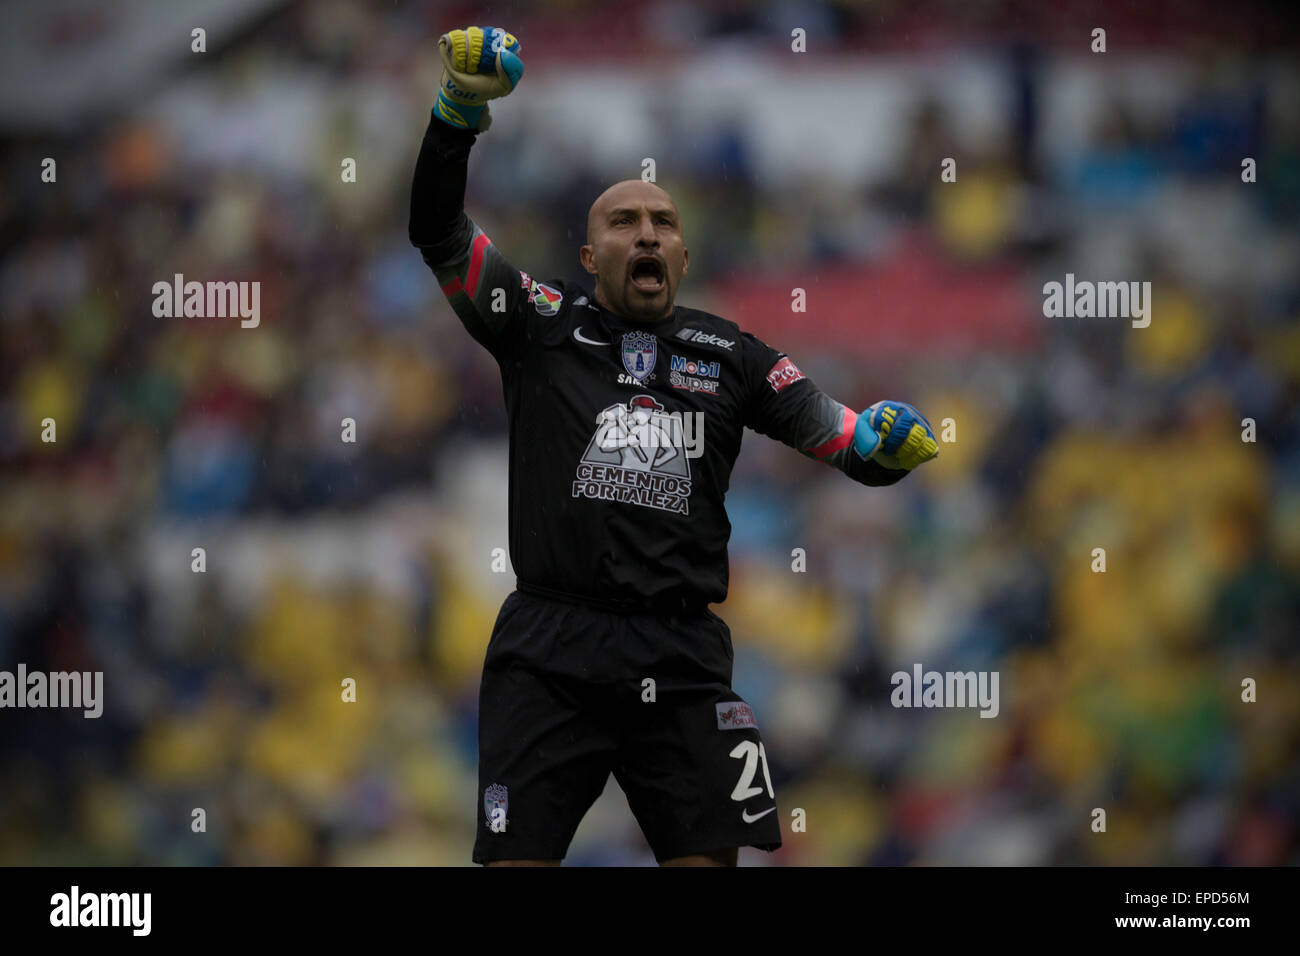 Mexico City, Mexico. 16th May, 2015. Pachuca's goalkeeper Oscar Perez celebrates a score during the second quarterfinal match of 2015 Closing Tournament of MX League against America, in the Azteca Stadium, in Mexico City, capital of Mexico, on May 16, 2015. © Alejandro Ayala/Xinhua/Alamy Live News Stock Photo